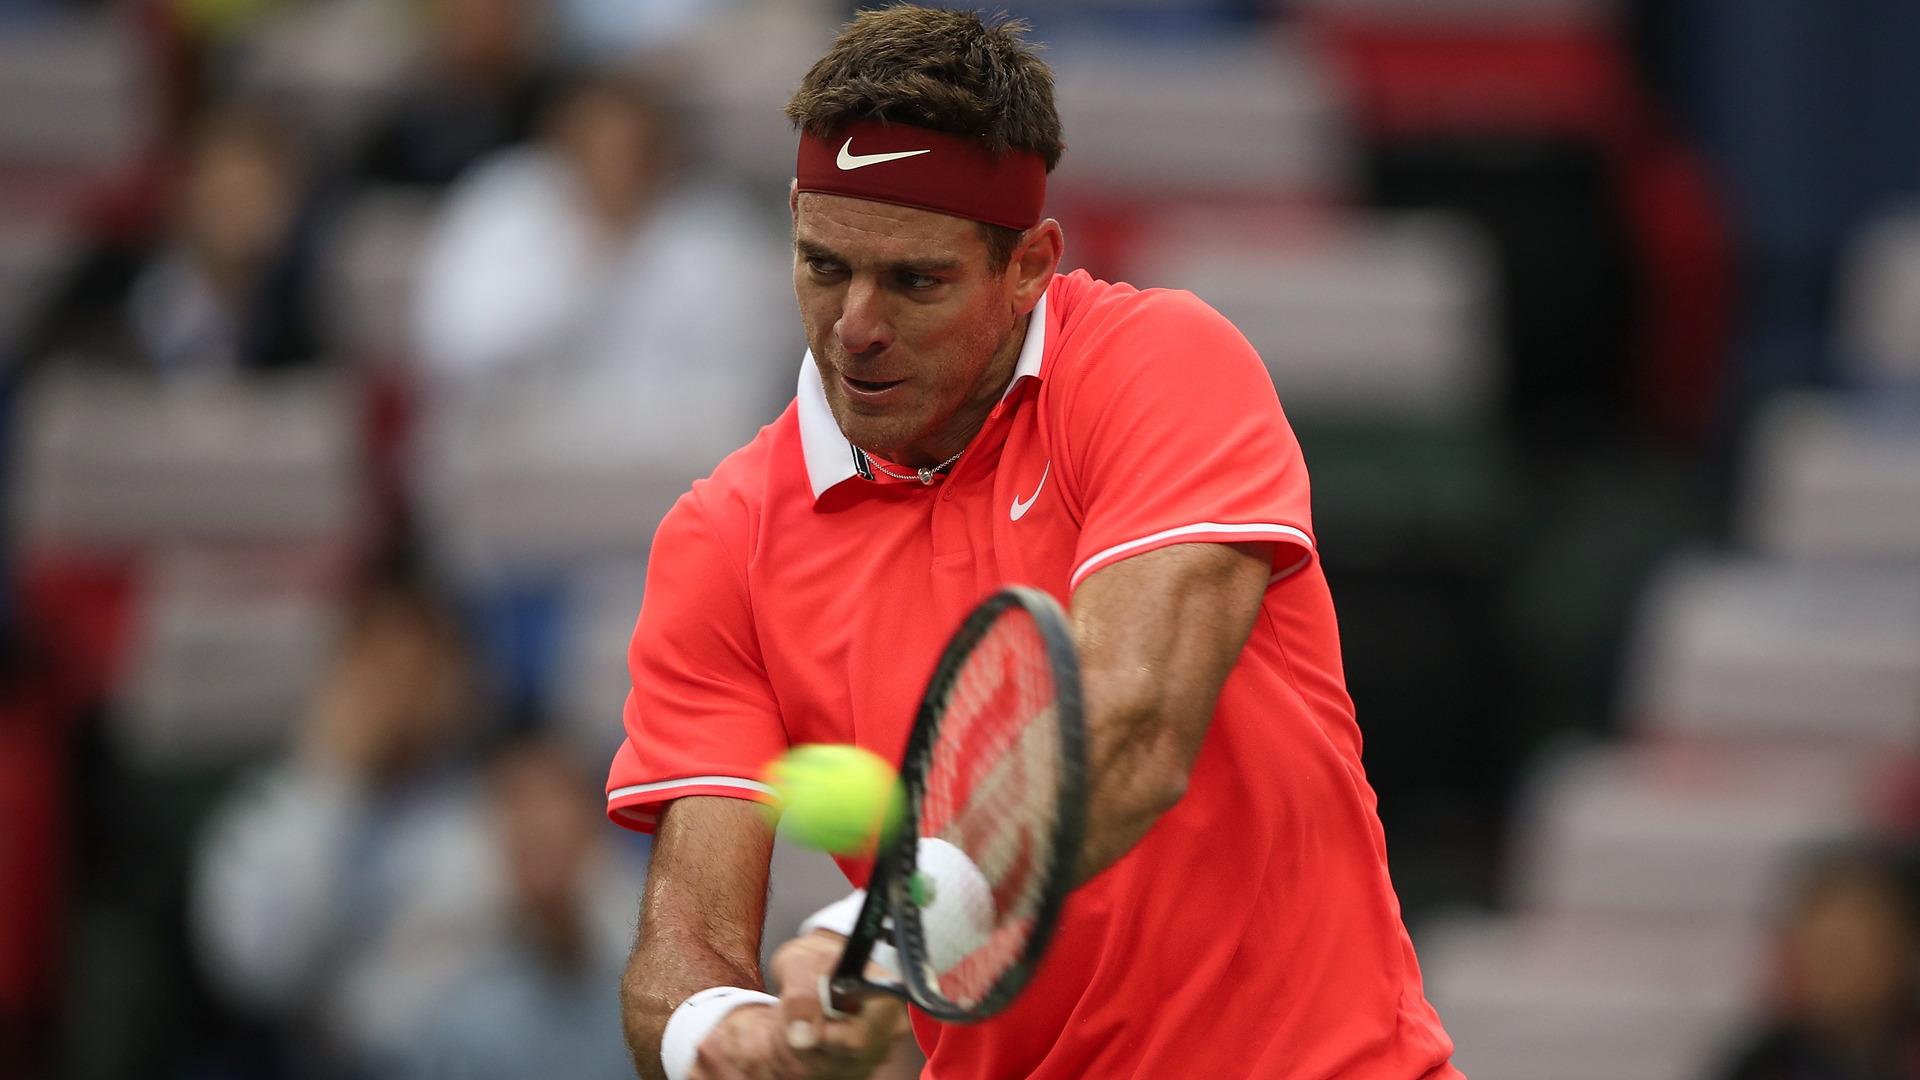 As he continues to recover from knee surgery, Juan Martin del Potro will miss the US Open.